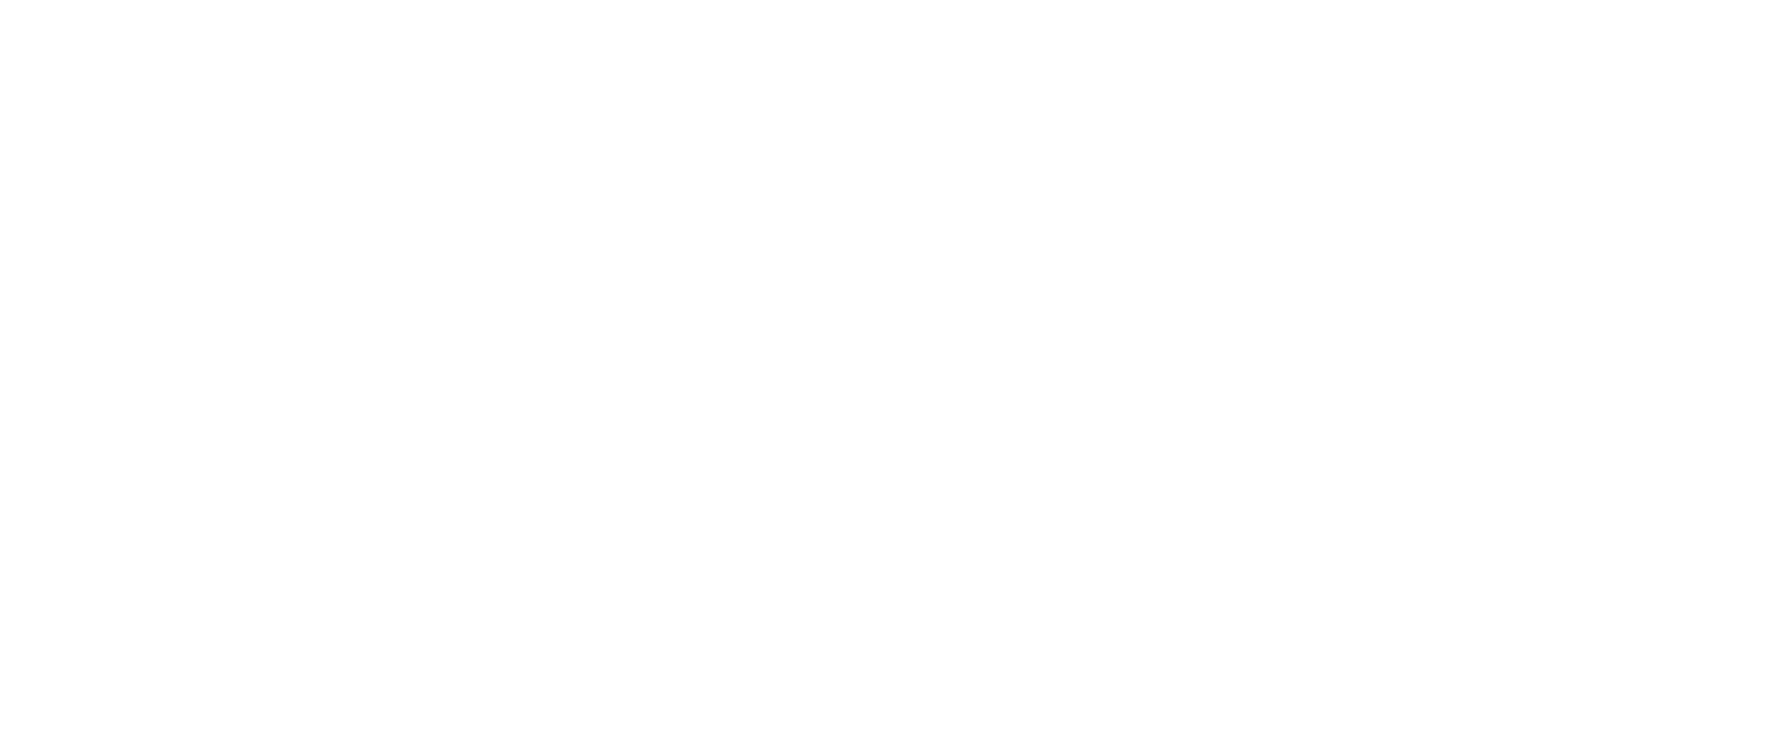 XPEL logo for dark backgrounds (transparent PNG)